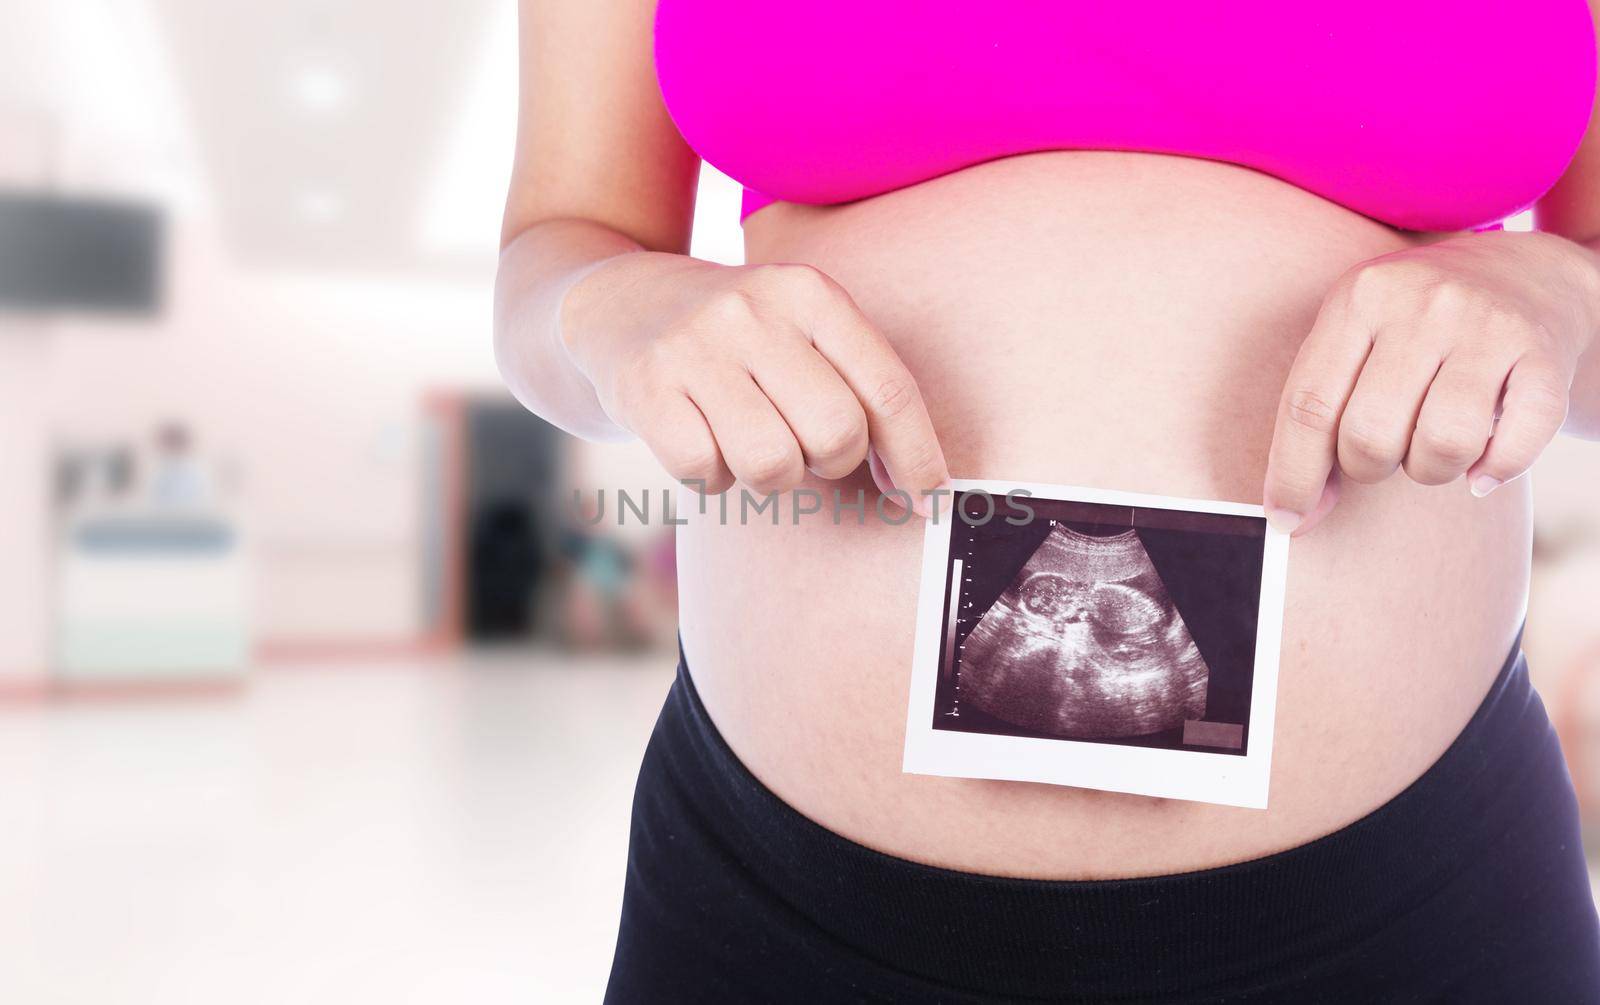 Pregnant woman hands holding ultrasound photo isolated in hospital background